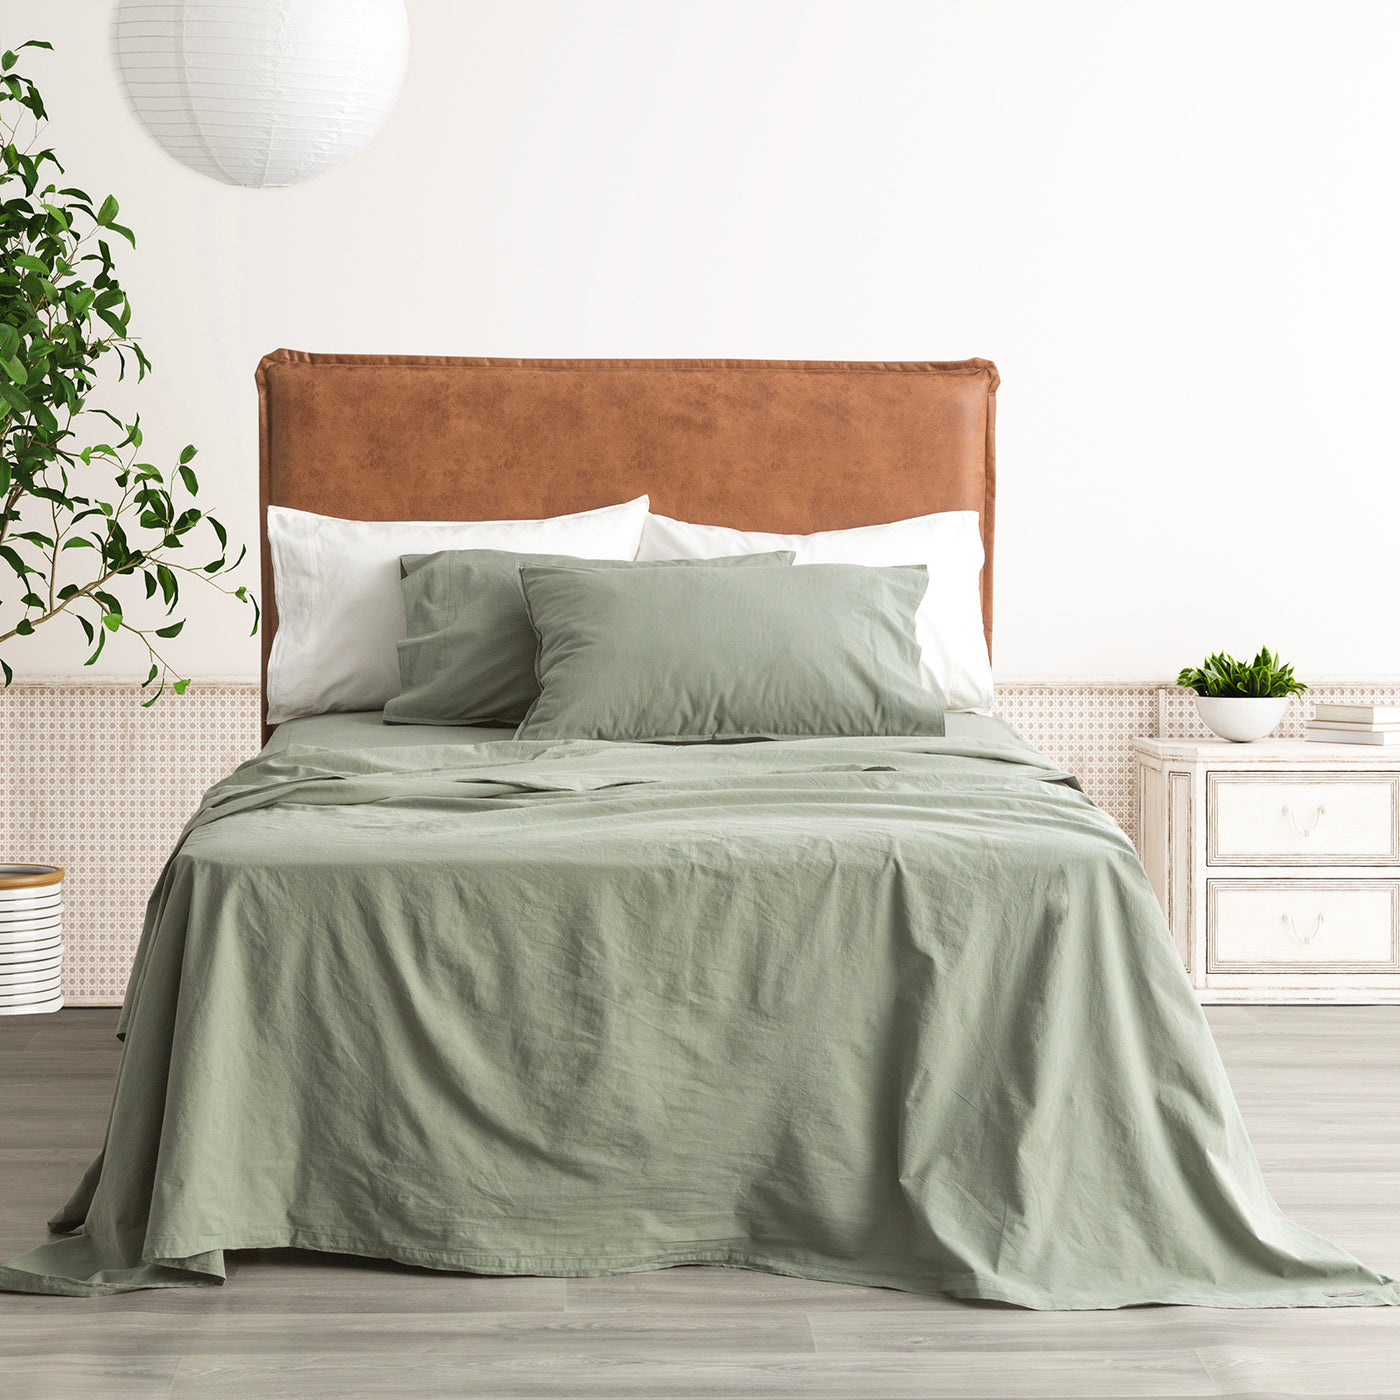 Stone washed sheets-big w sheets-vintage-wash cotton sheet set-kmart sheet sets-bed sheets-target sheet sets White-French blue-red- stone-sage-fern- click frenzy. Payment gateways afterpay, googlepay, zippay, within Australia free post.